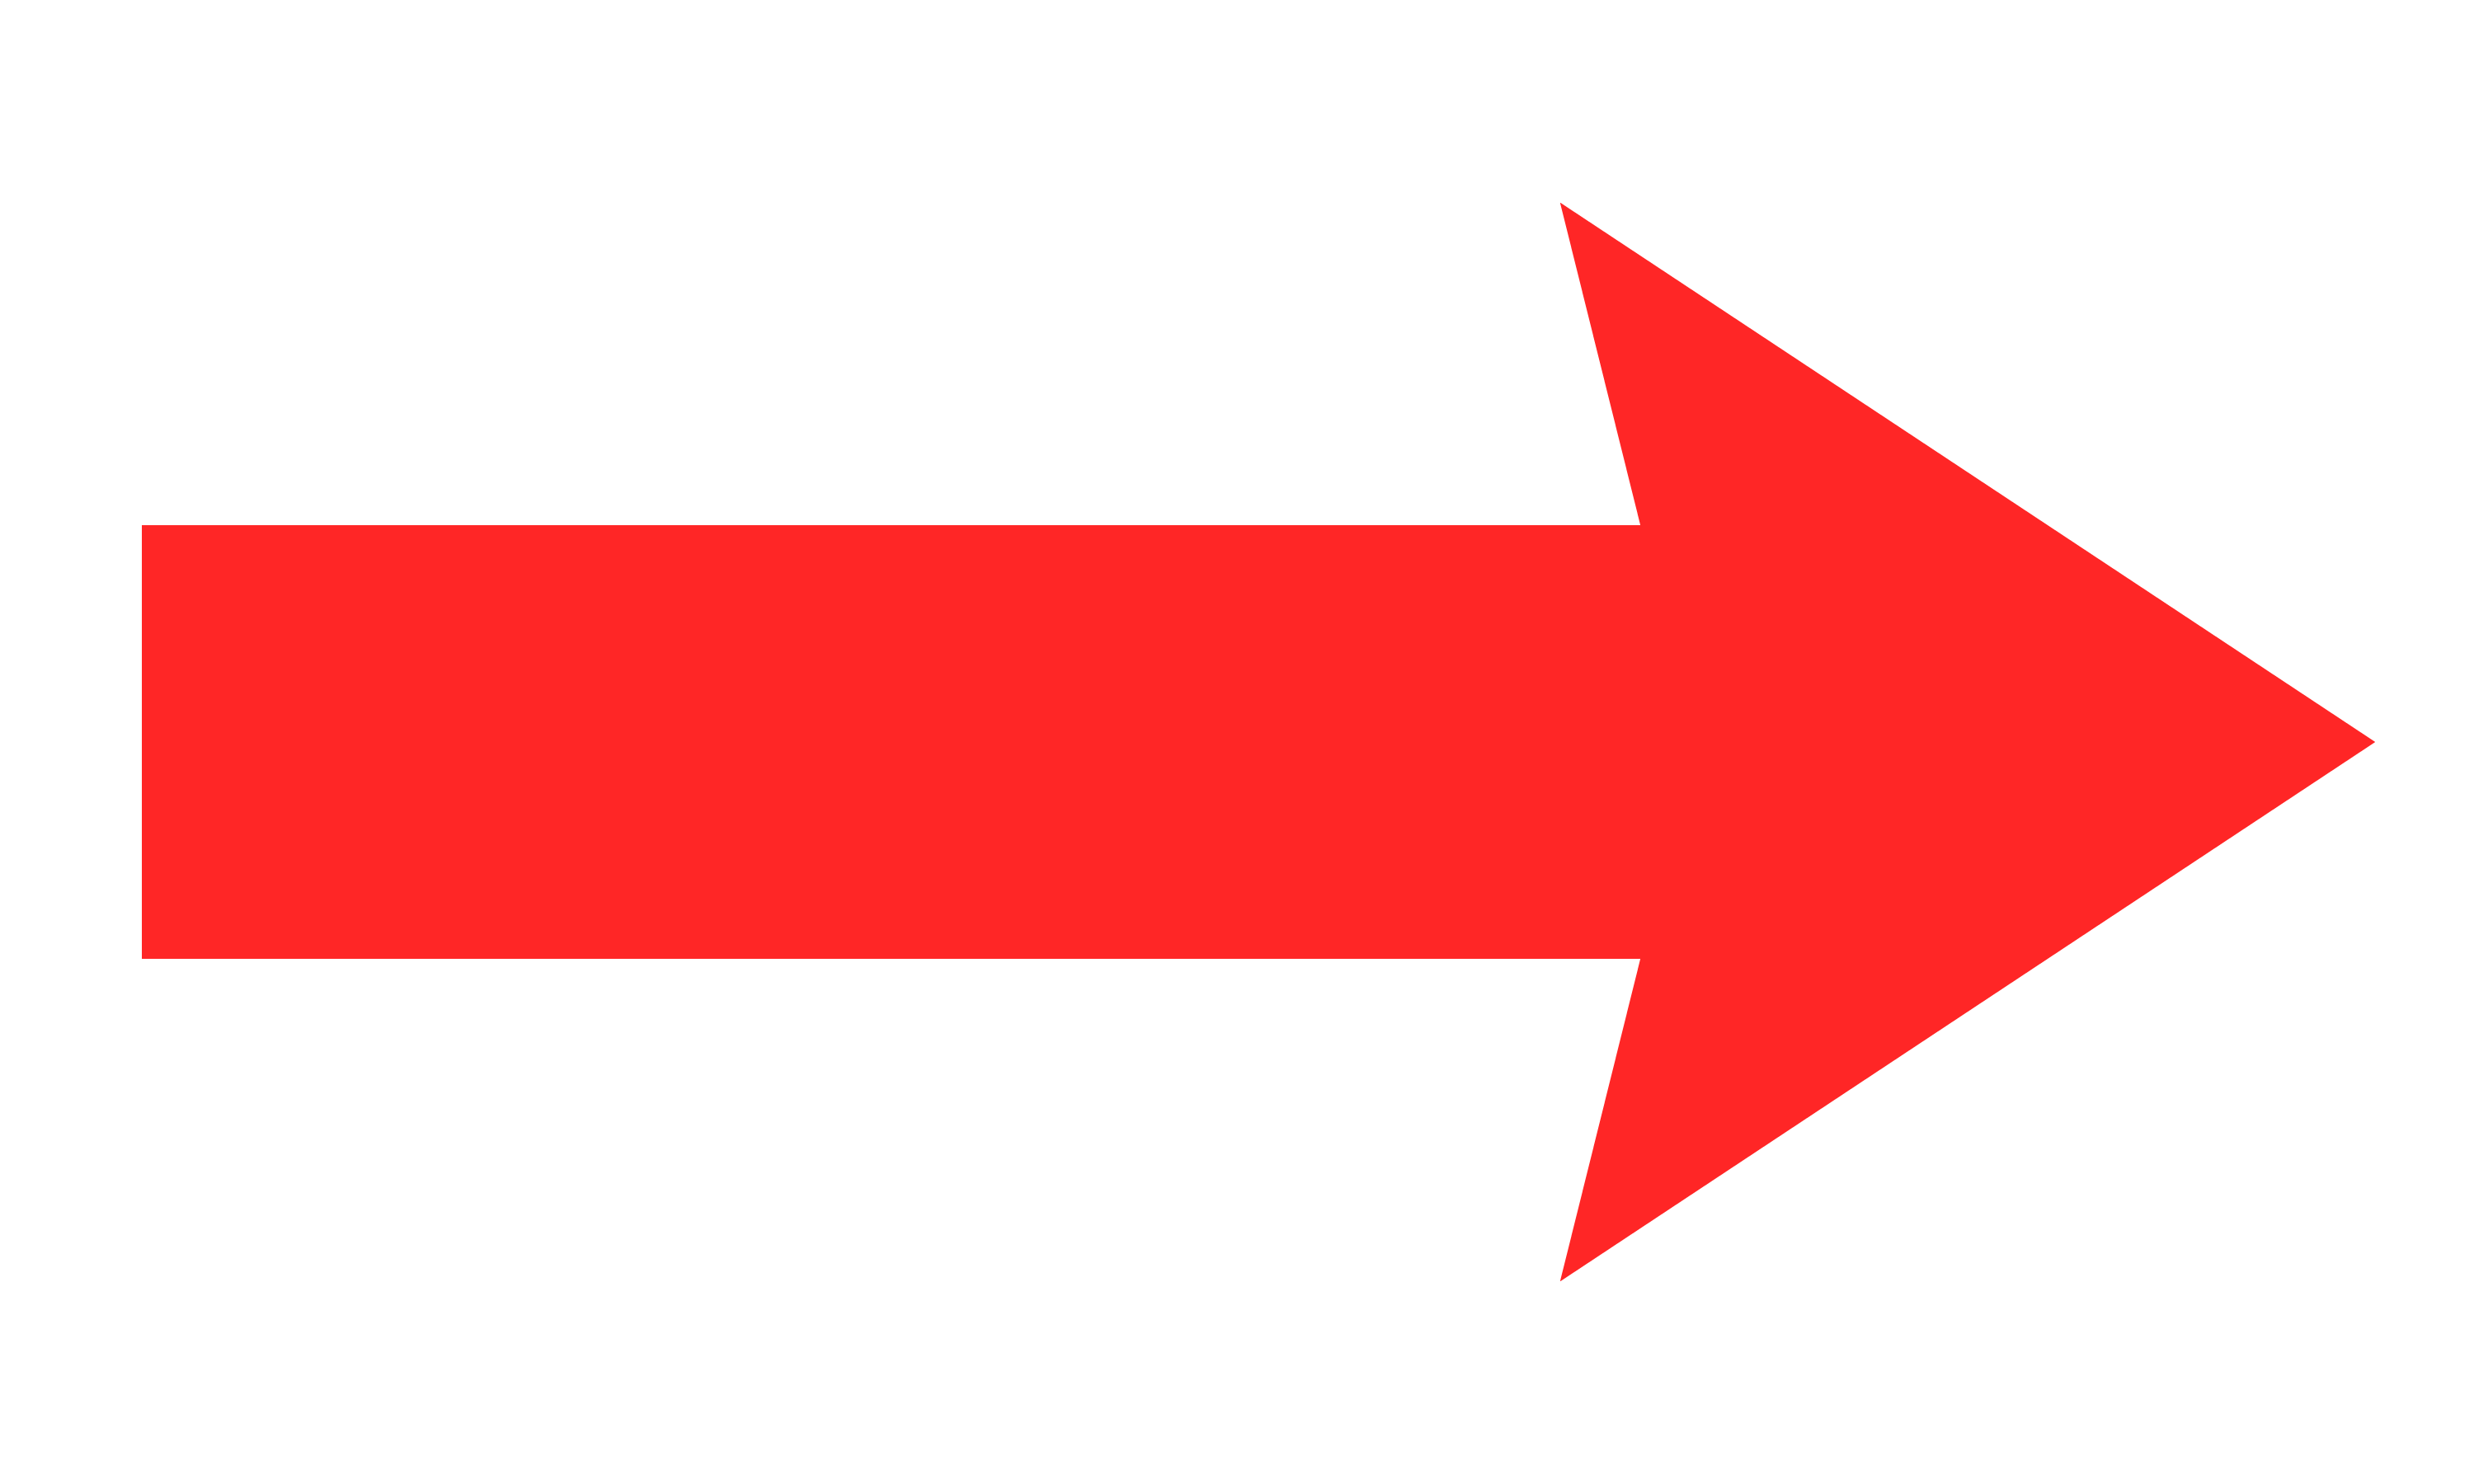 Red arrow PNG image with transparent background.